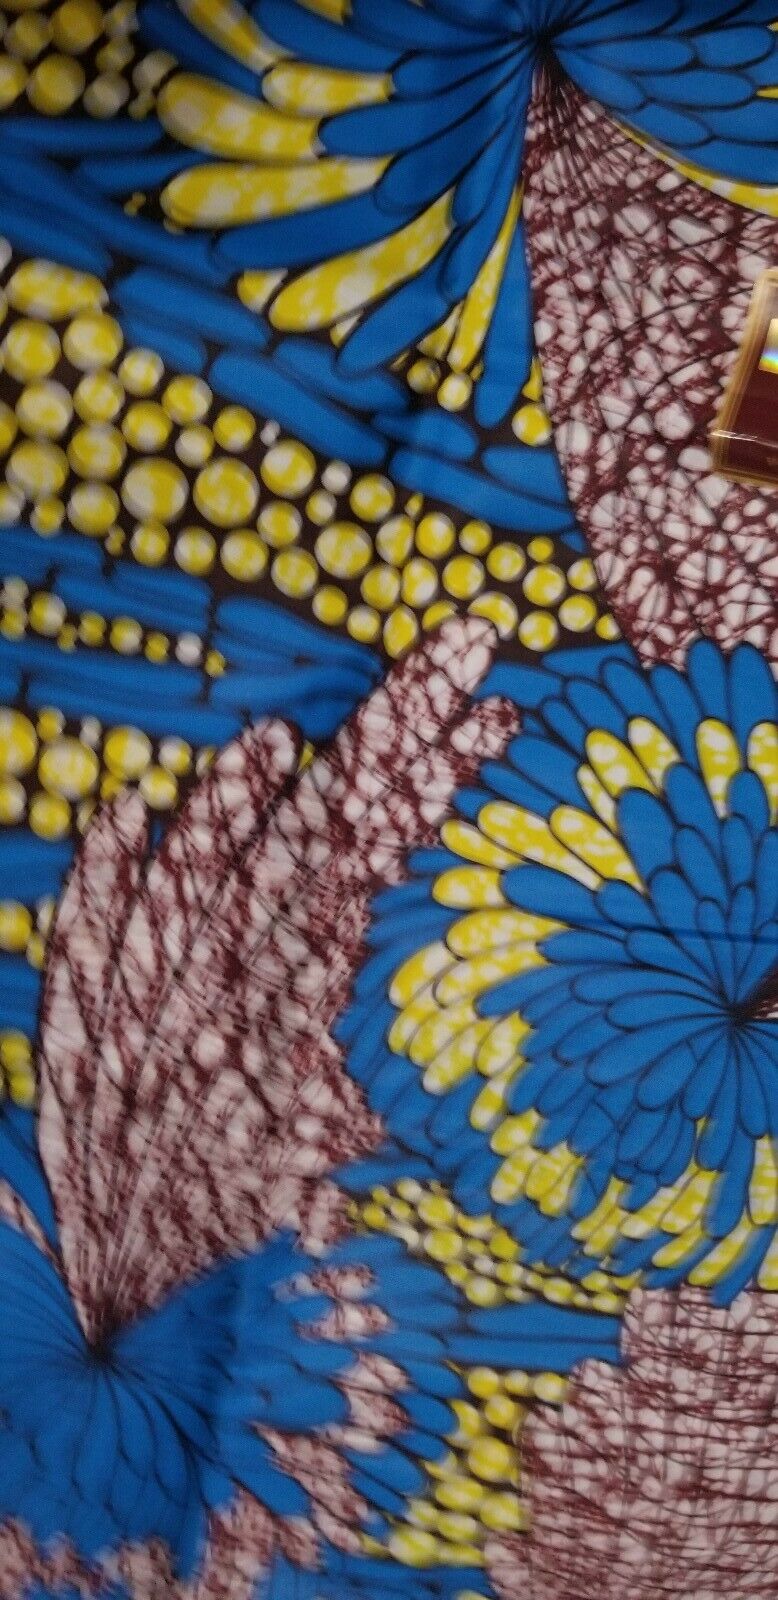 MULTICOLOR African Wax Print 100% Cotton Fabric 3yrds ×(44 in.) ~$16.50